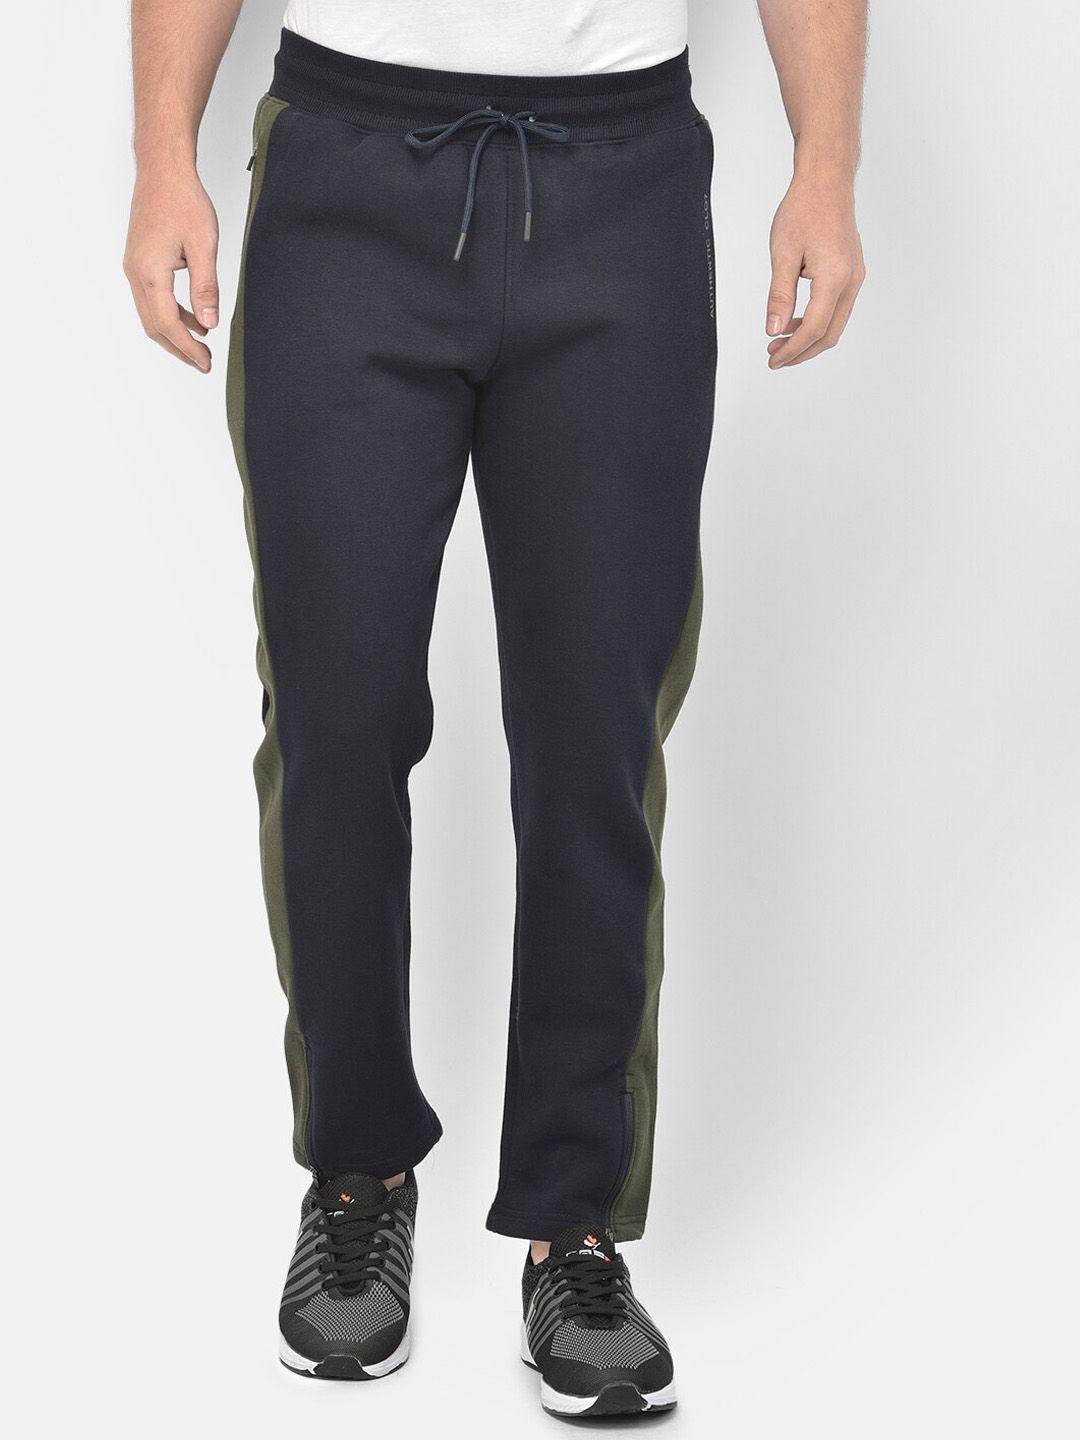 canary london men navy blue & green colourblocked straight-fit pure cotton track pants